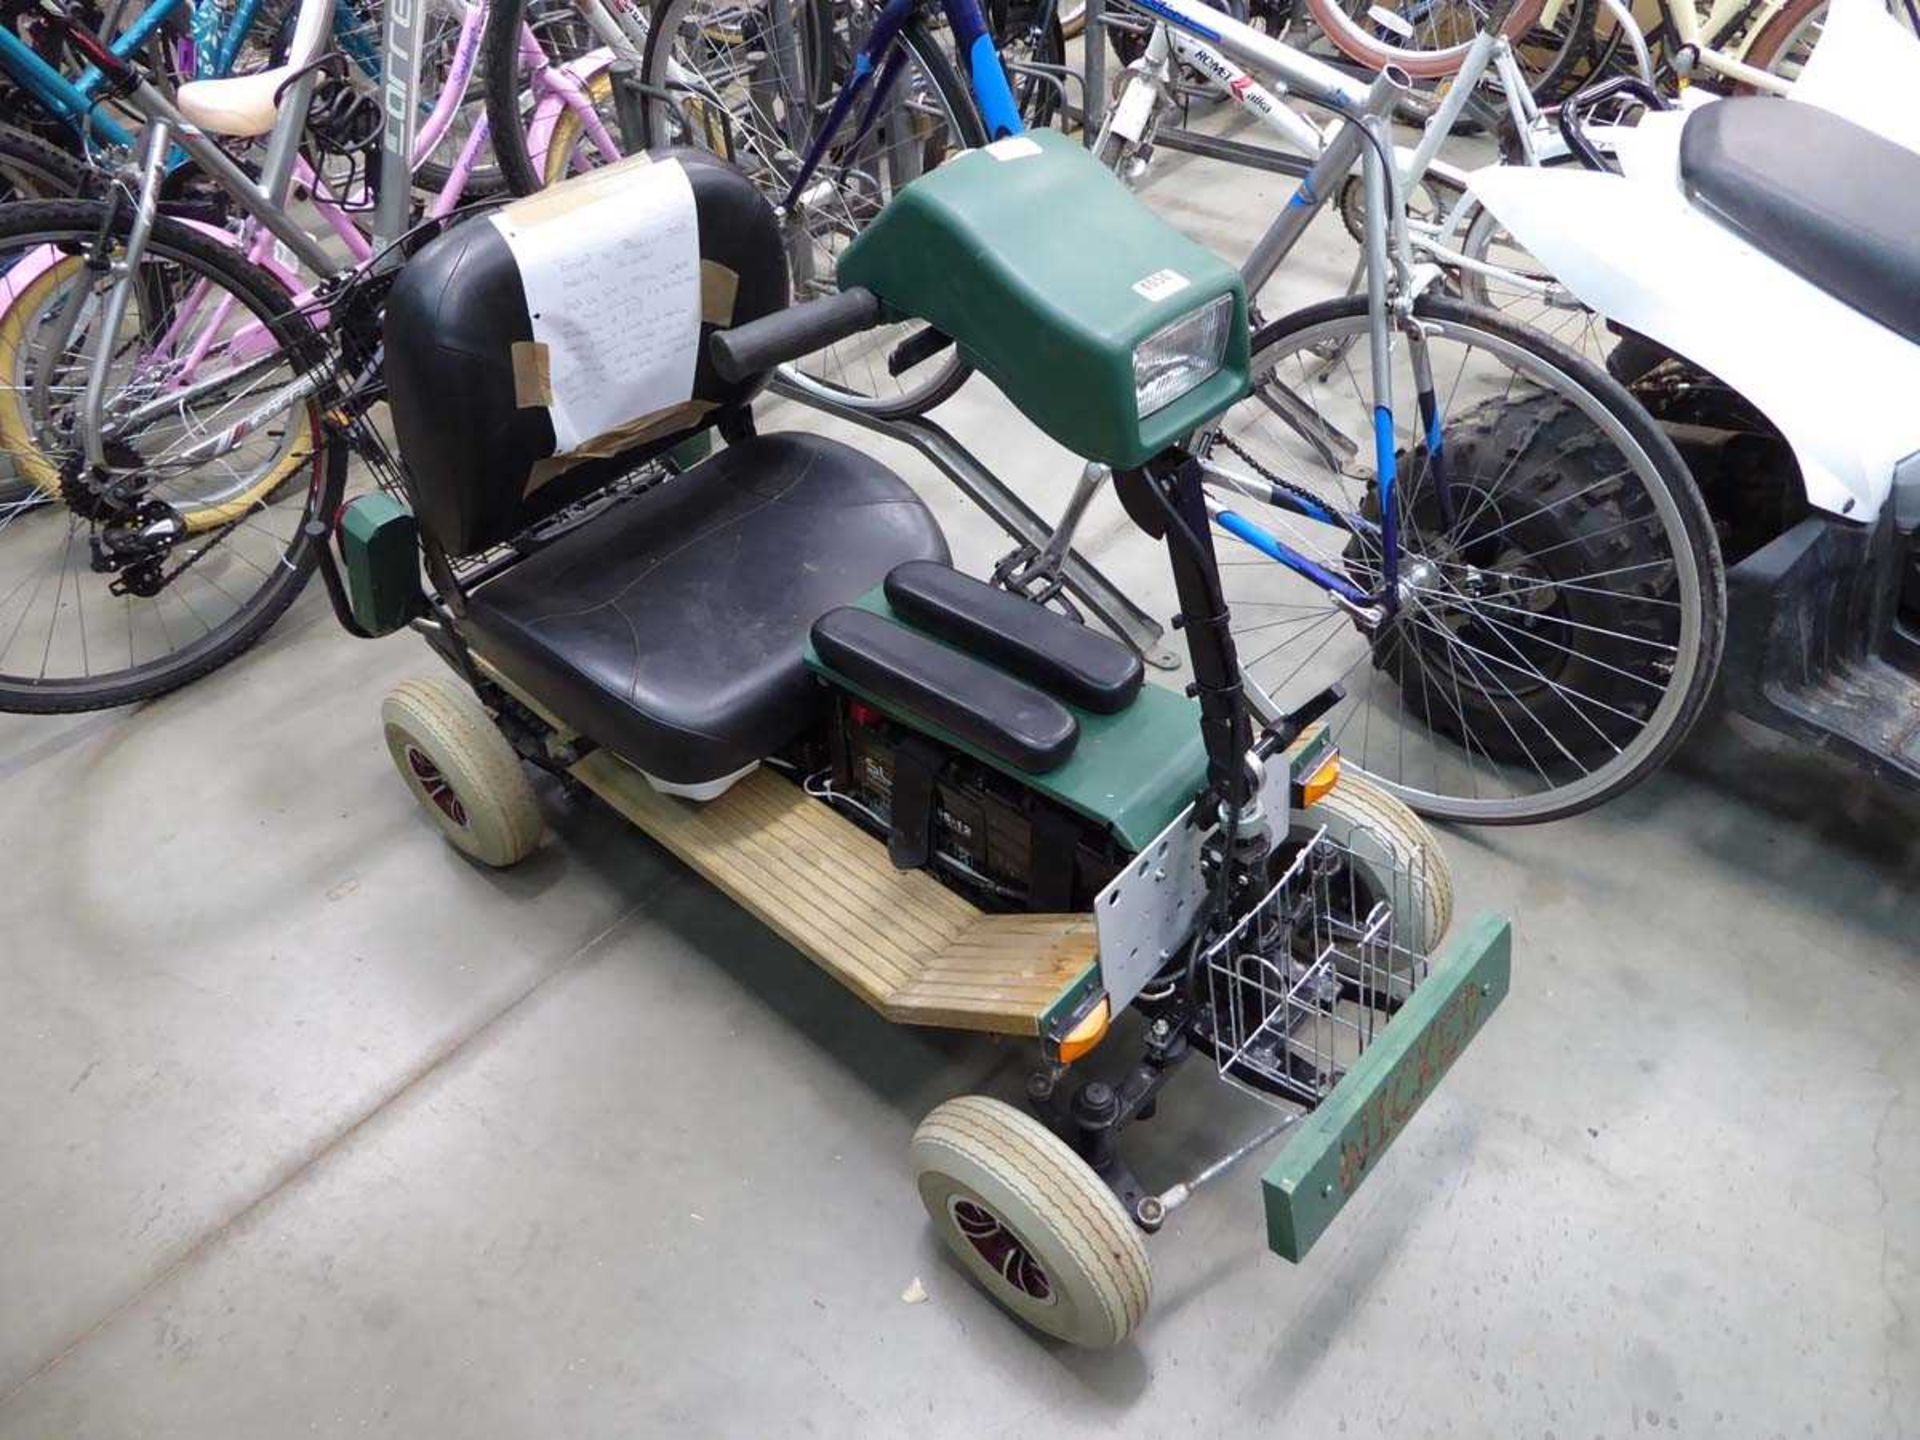 Mobility scooter style made up go kart